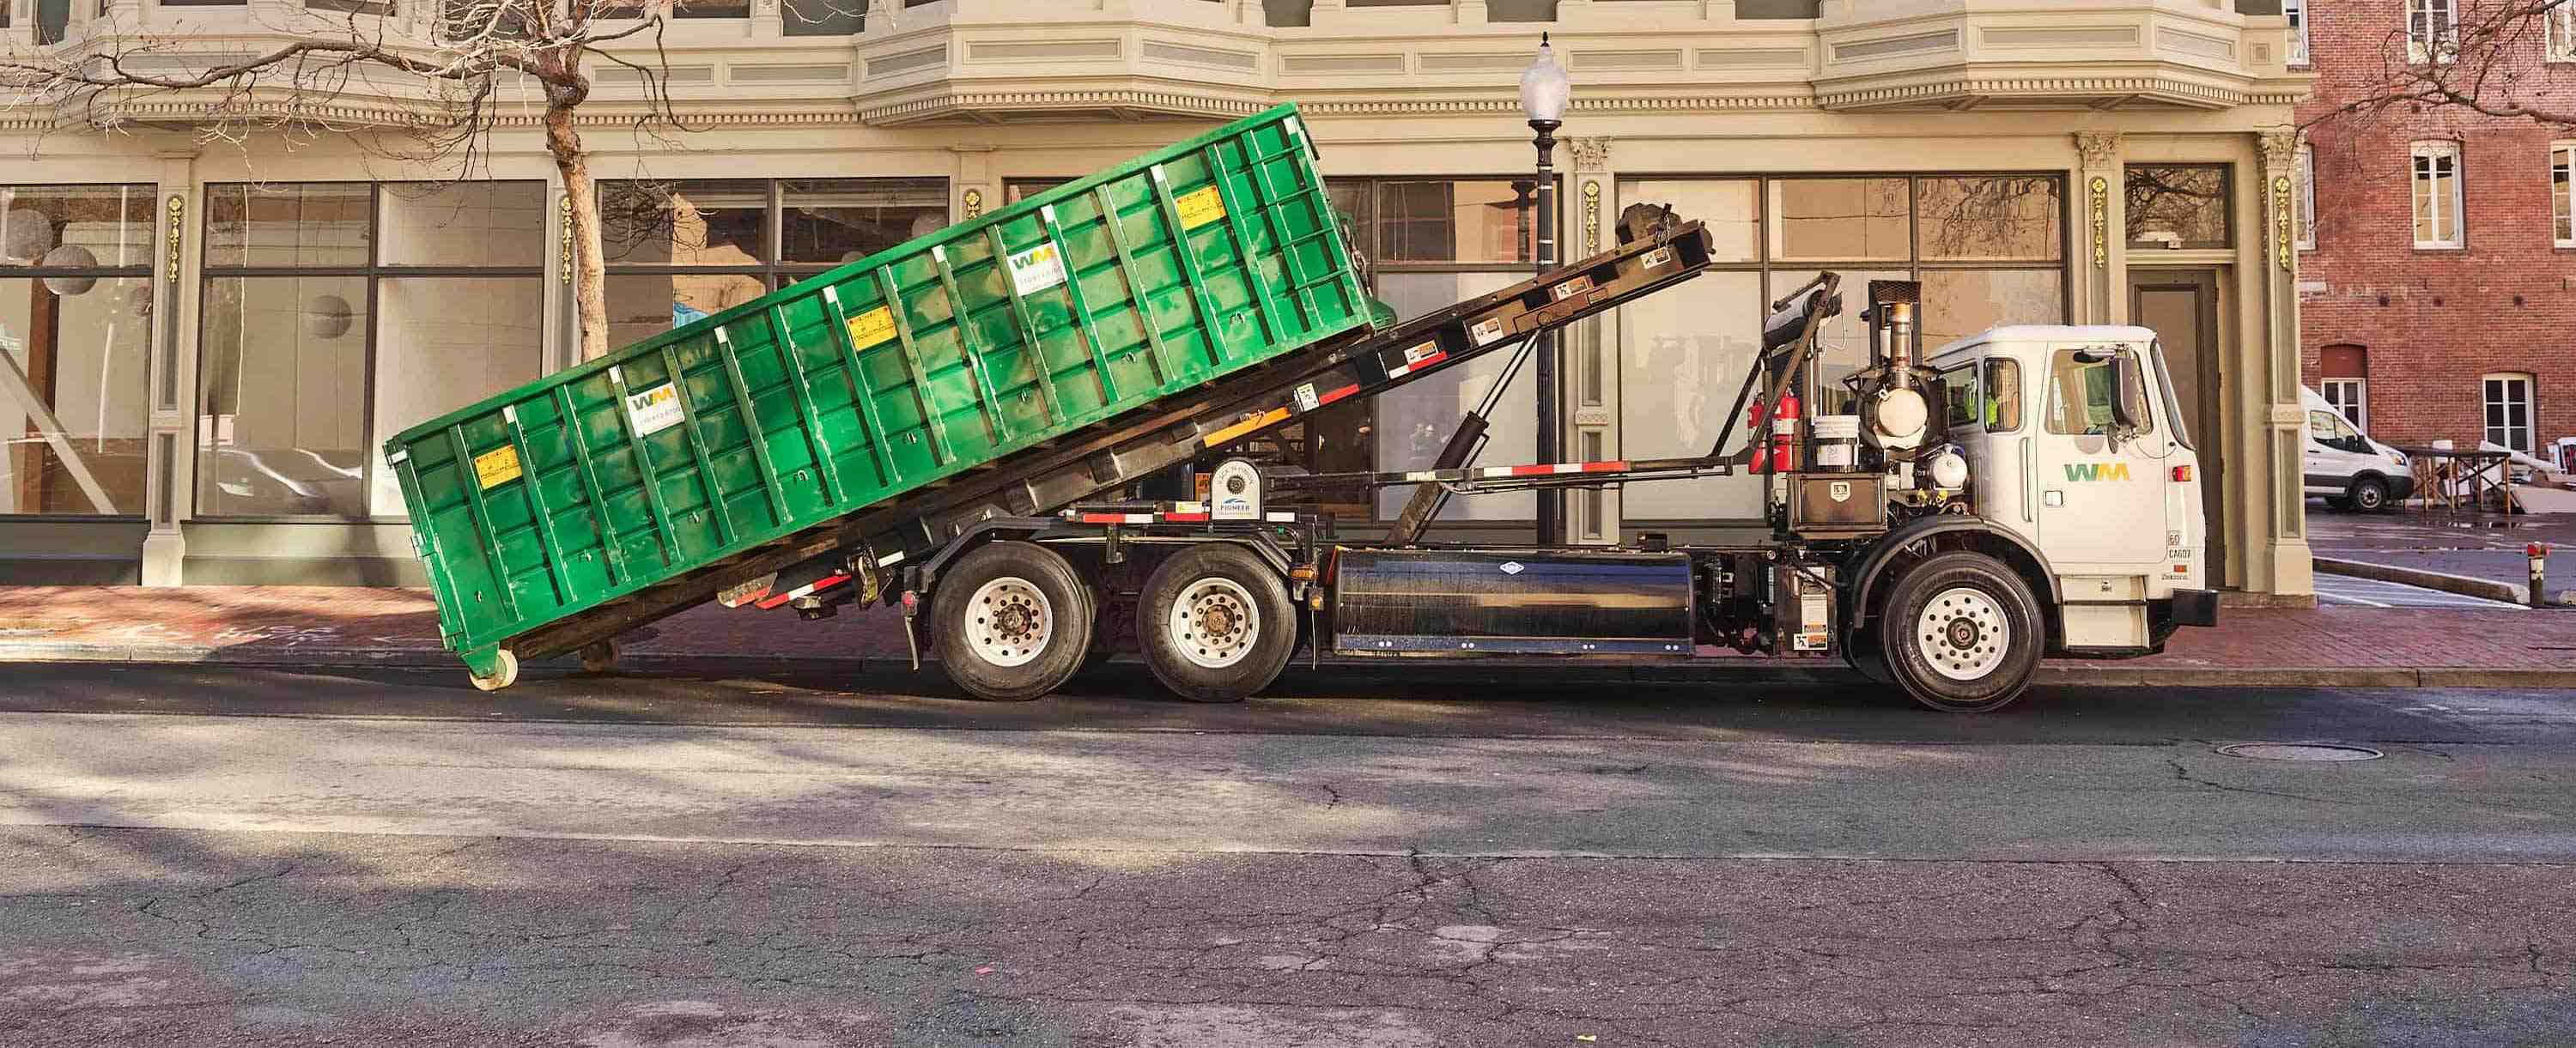 Getting The How Much Does It Cost To Rent A Dumpster? - Carrier Container Company To Work